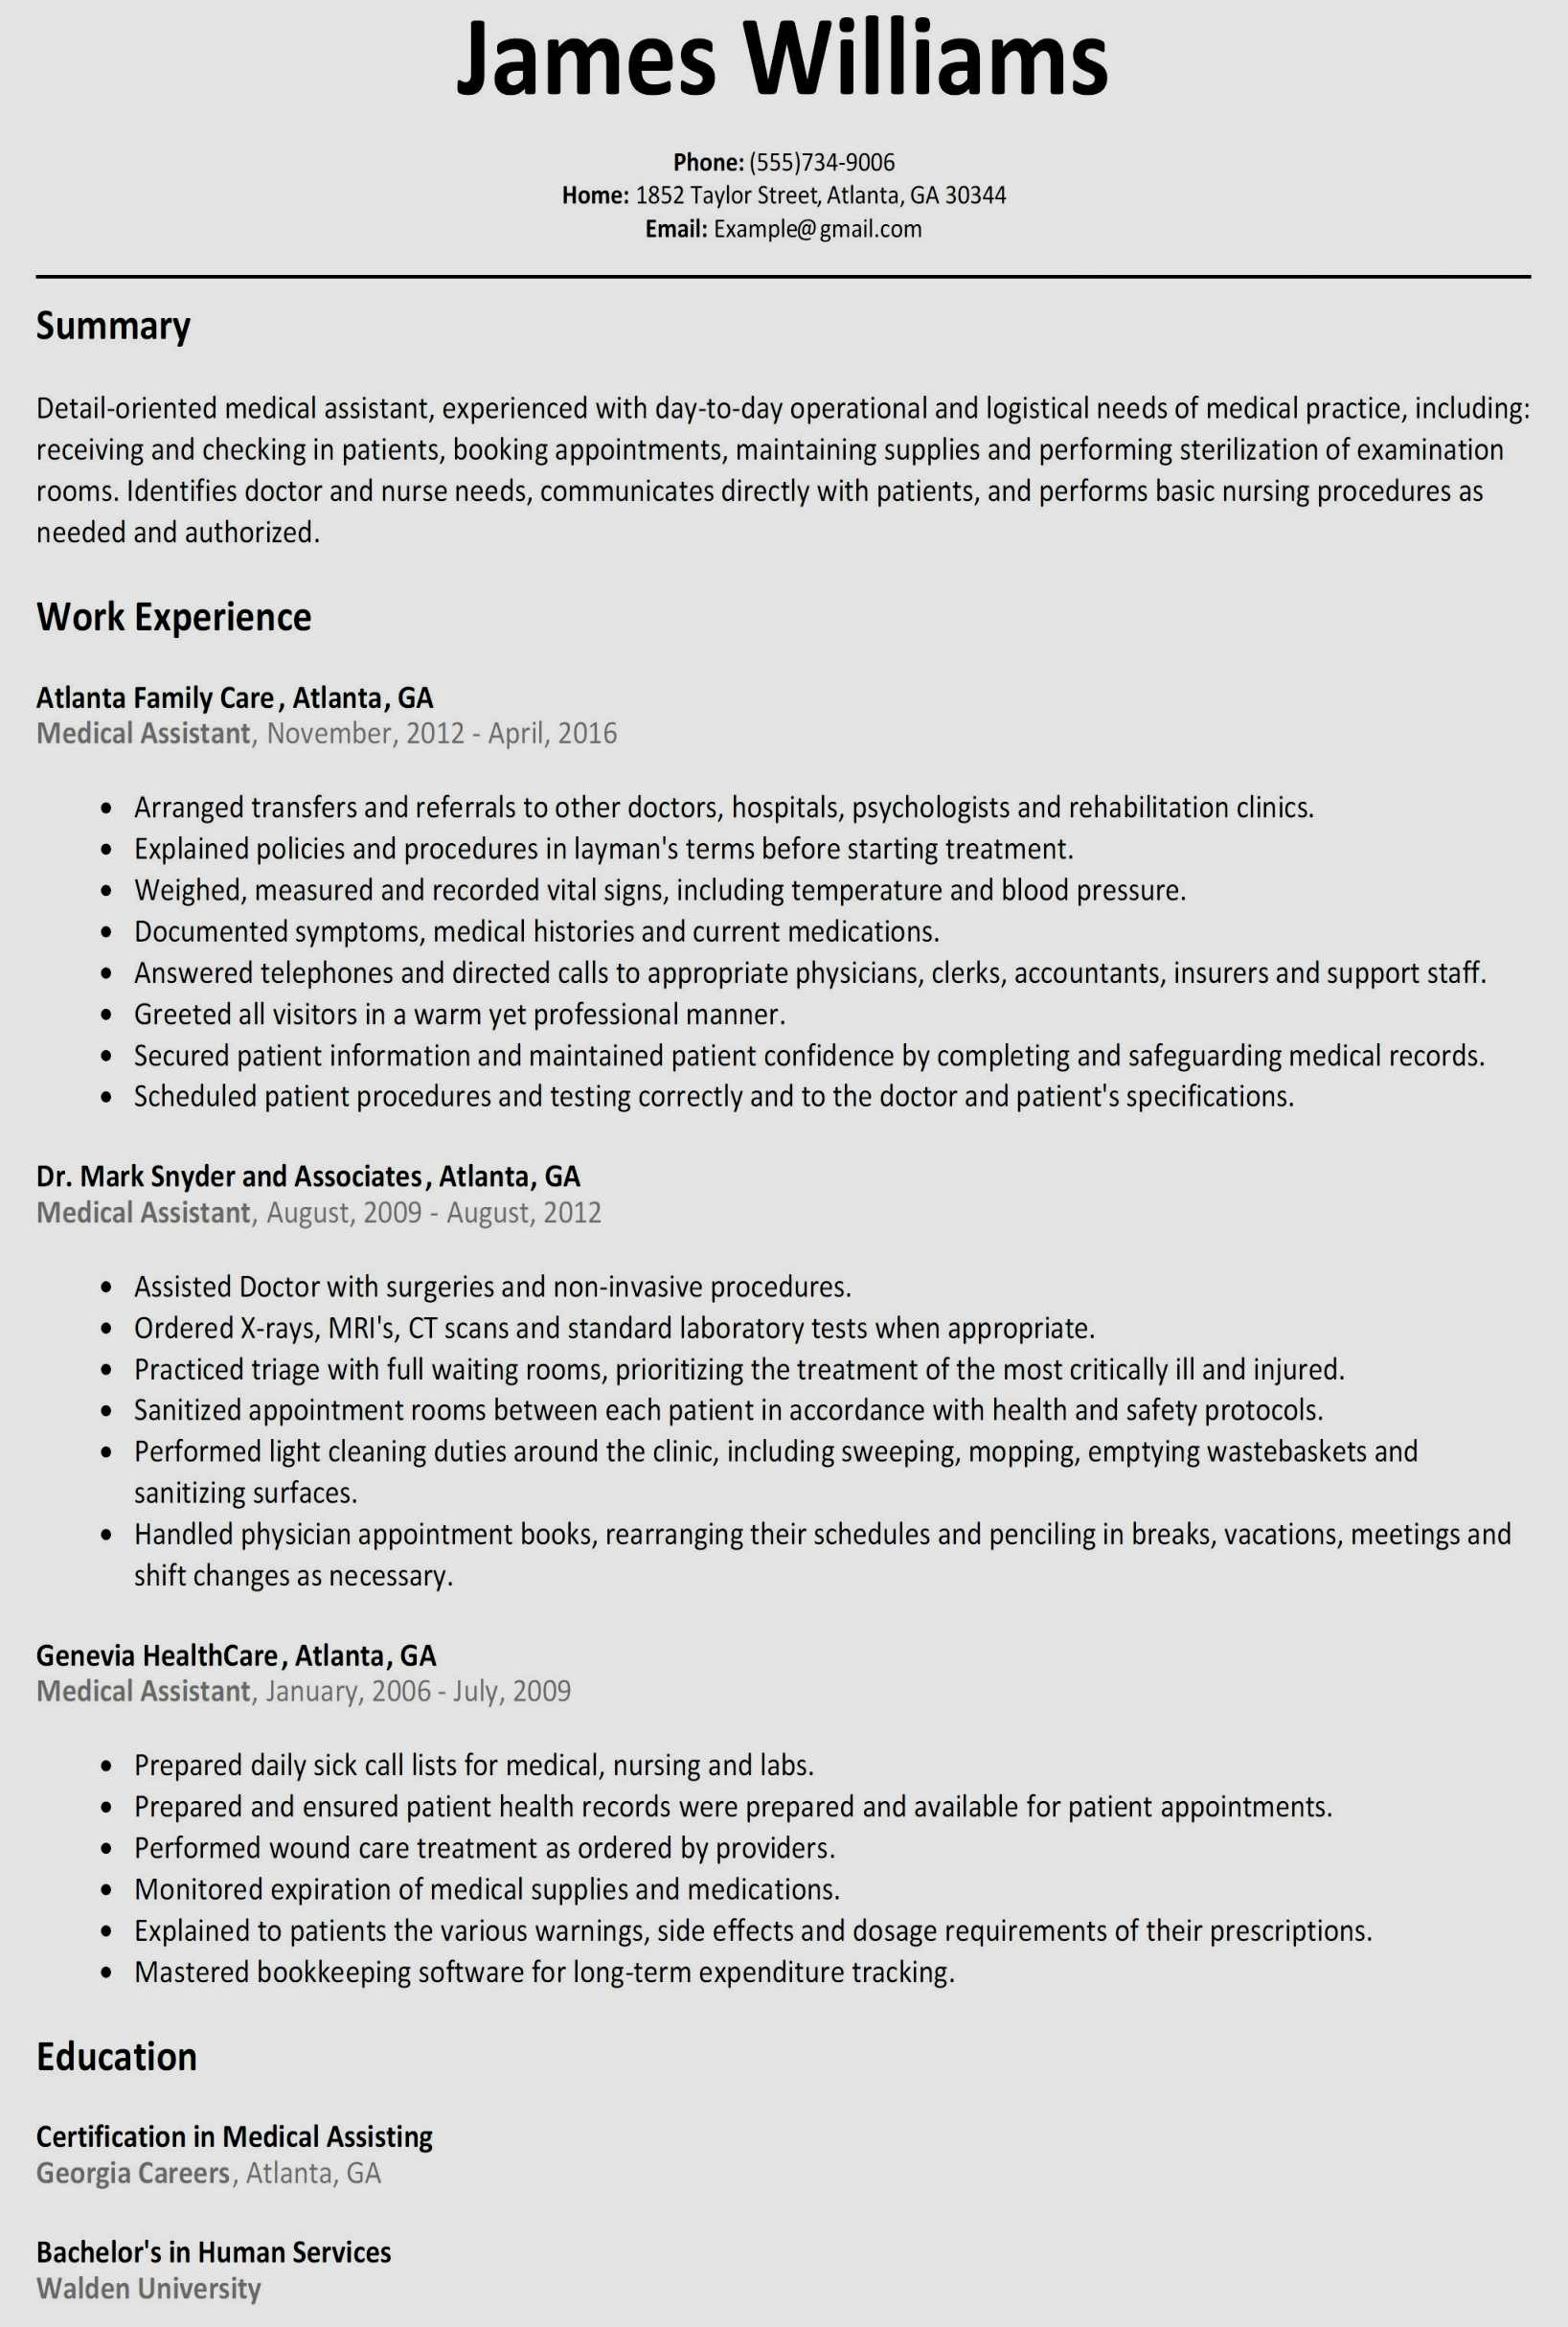 Free Resume Templates For Word Professional Resume Template Word 17 Templates Amp Samples Resume Template Microsoft Word Free Of Professional Resume Template Word free resume templates for word|wikiresume.com